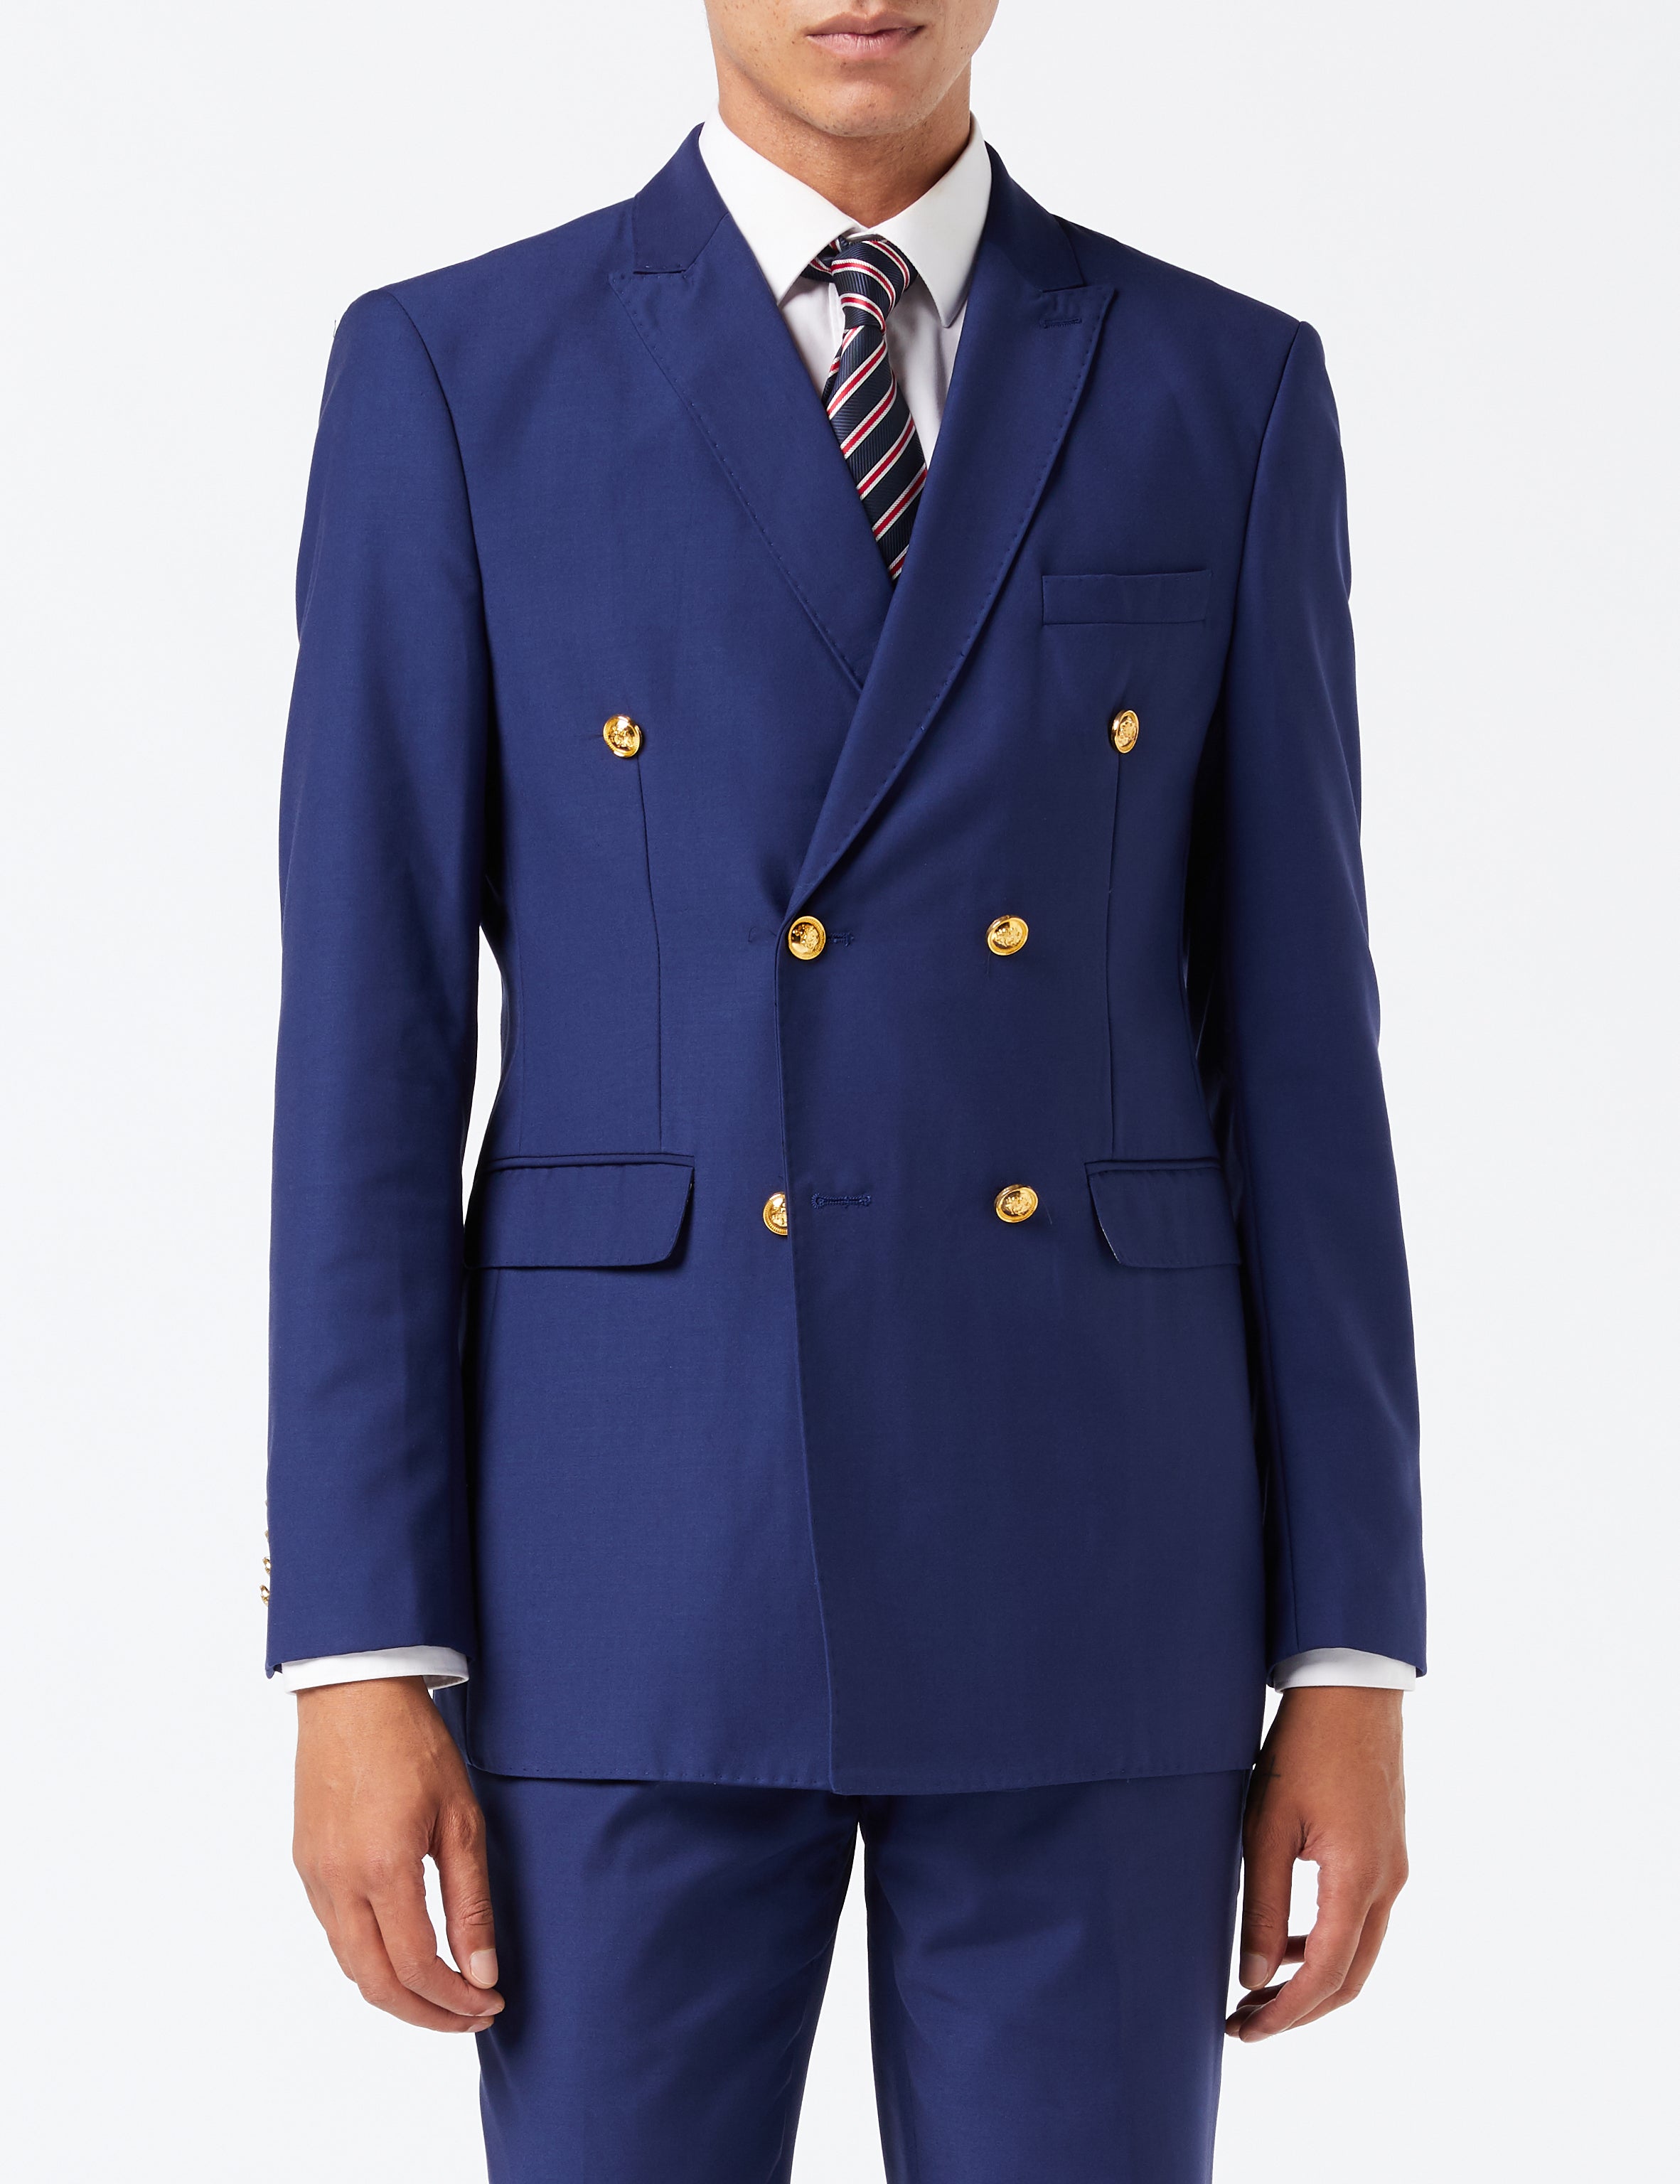 NAVY DOUBLE BREASTED GOLD BUTTON SUIT